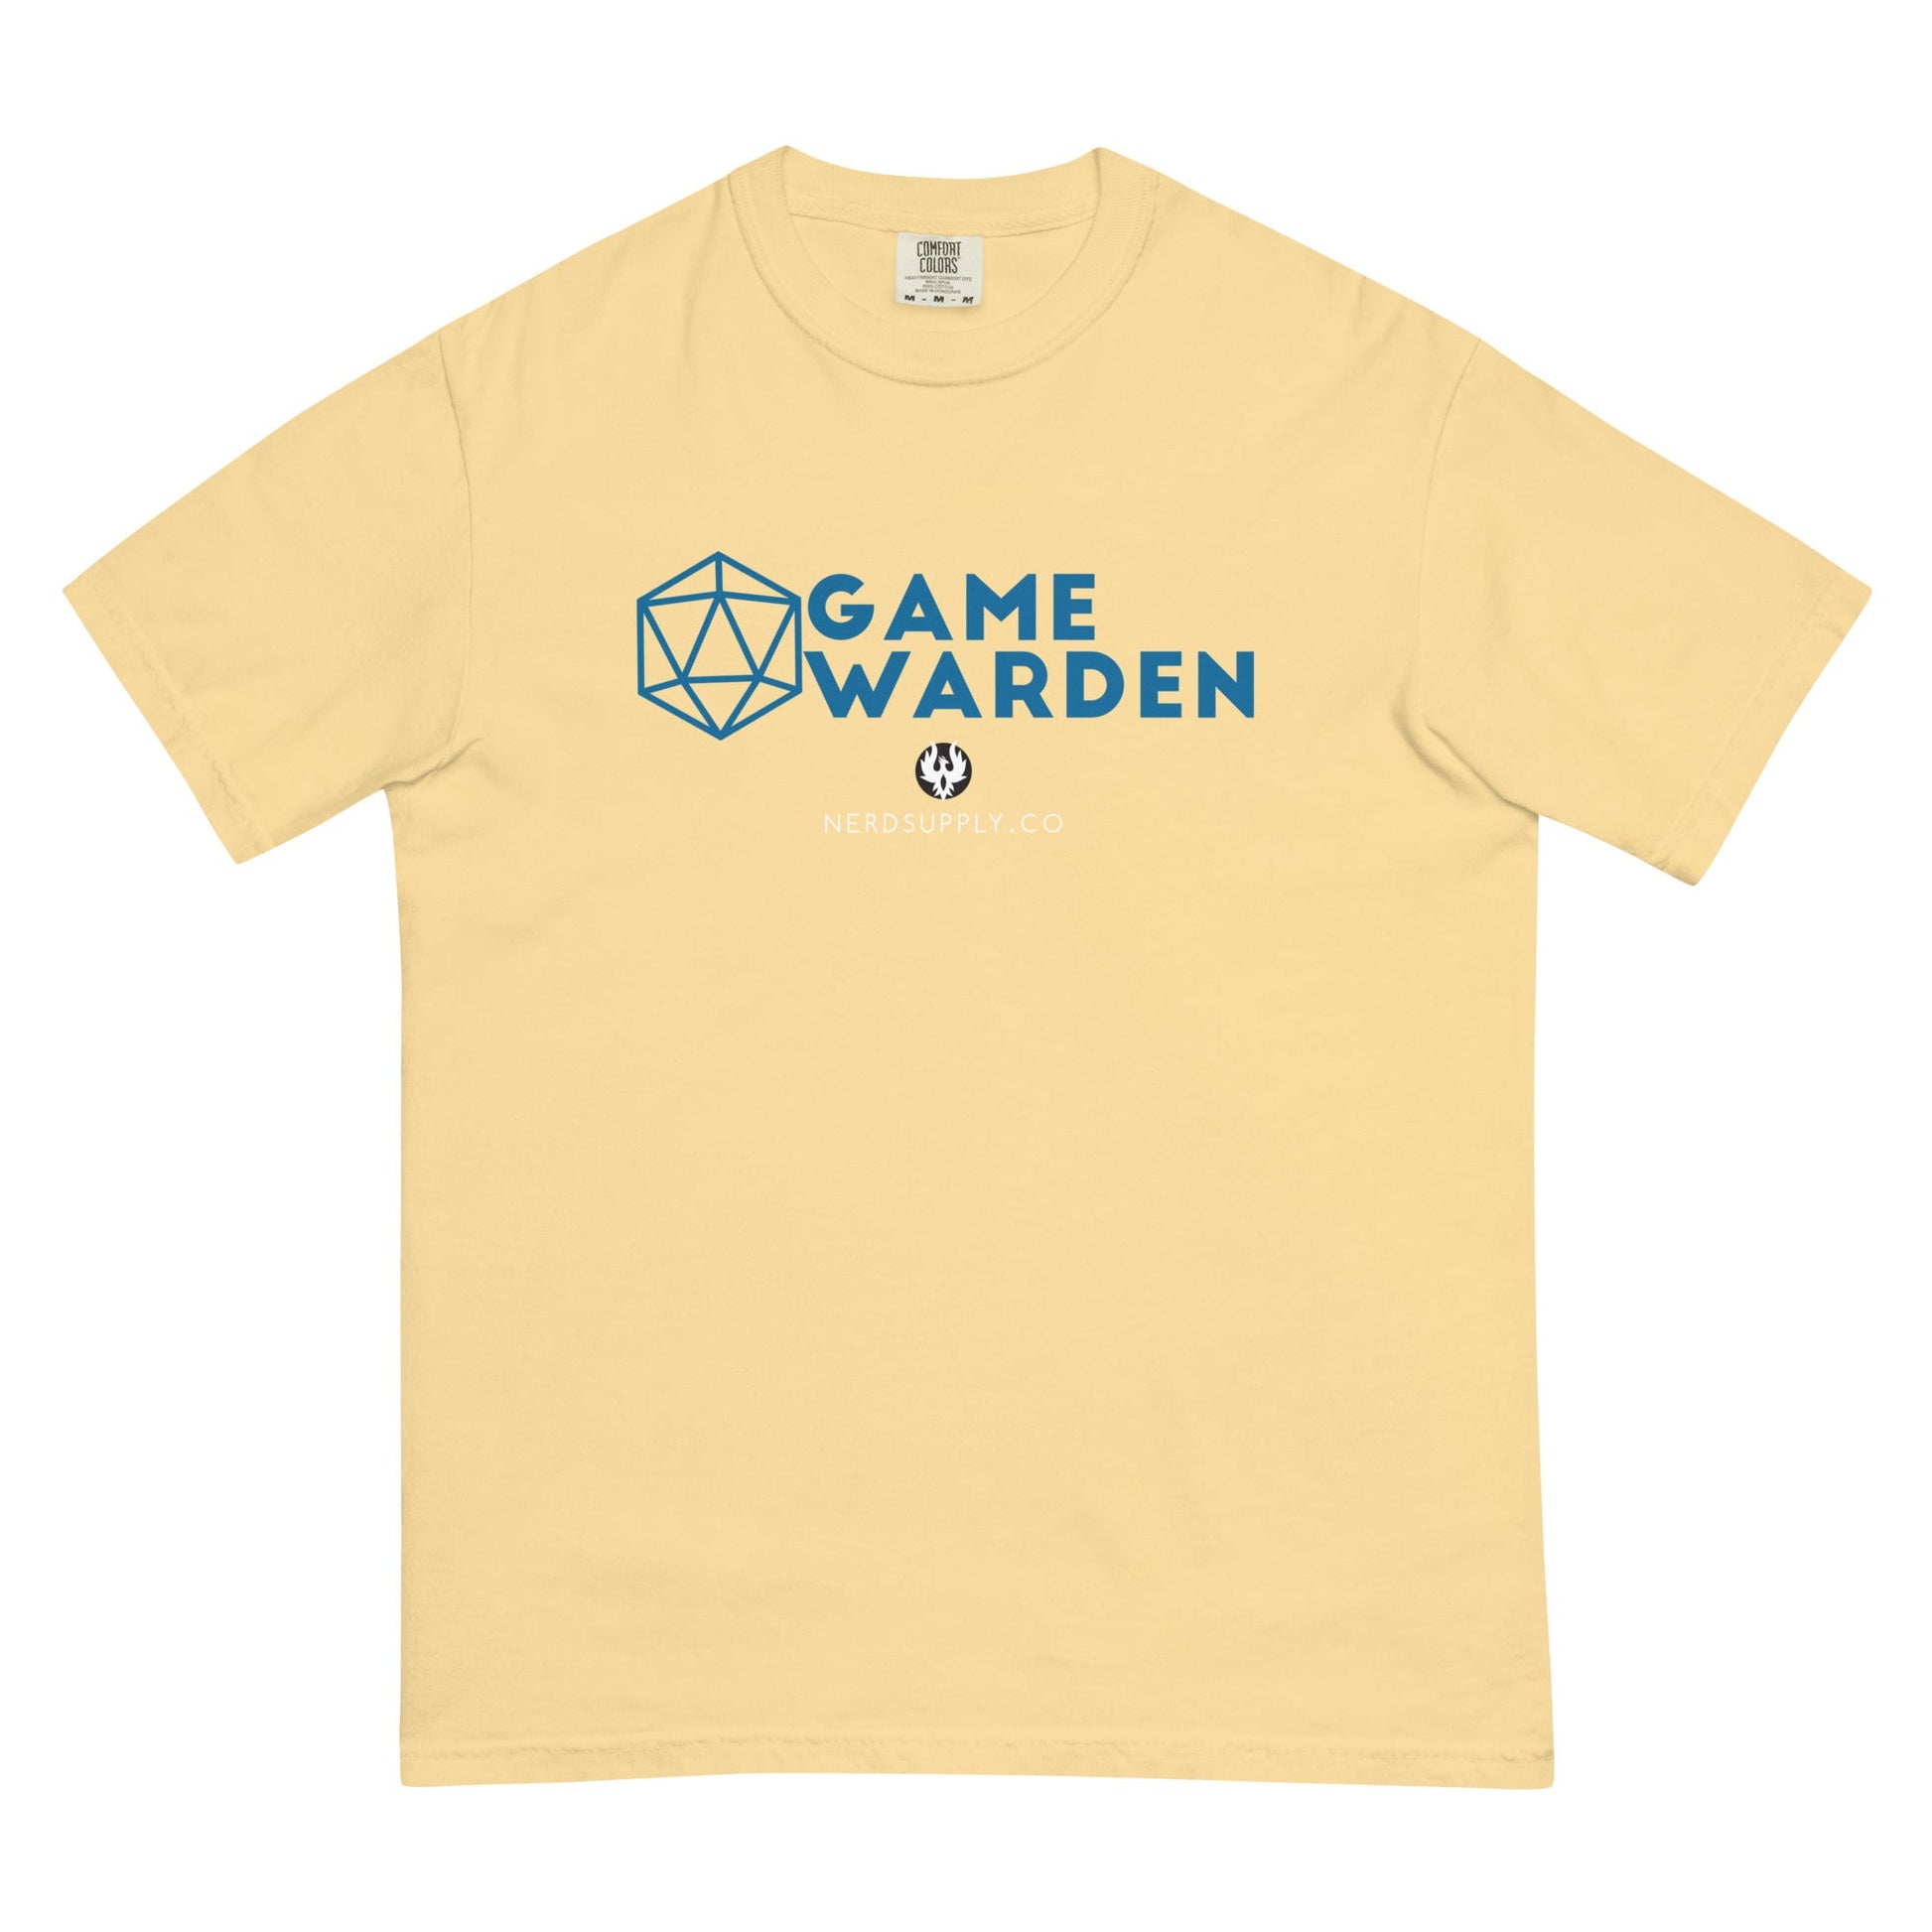 "Game Warden" - t-shirt - The Nerd Supply Company